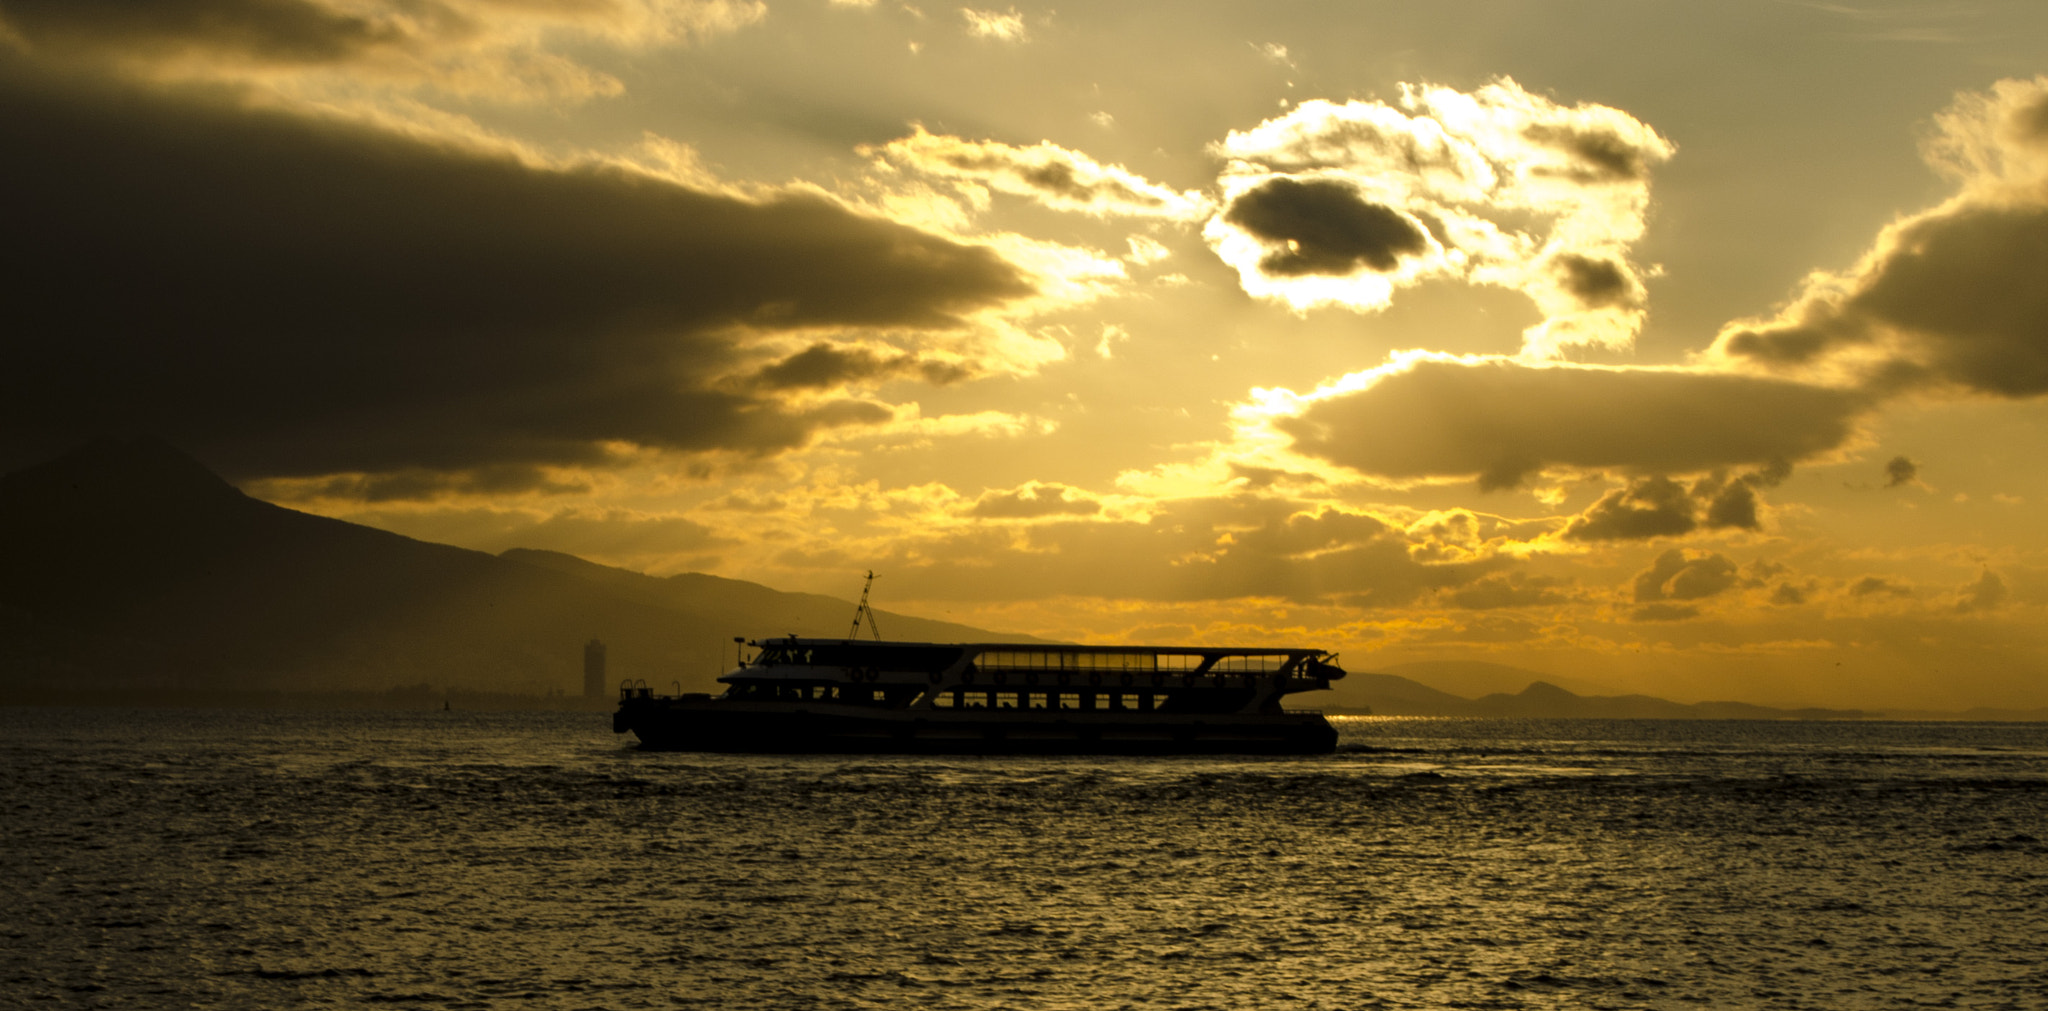 Nikon D5100 + Sigma 17-70mm F2.8-4 DC Macro OS HSM sample photo. The boat at the sunset photography